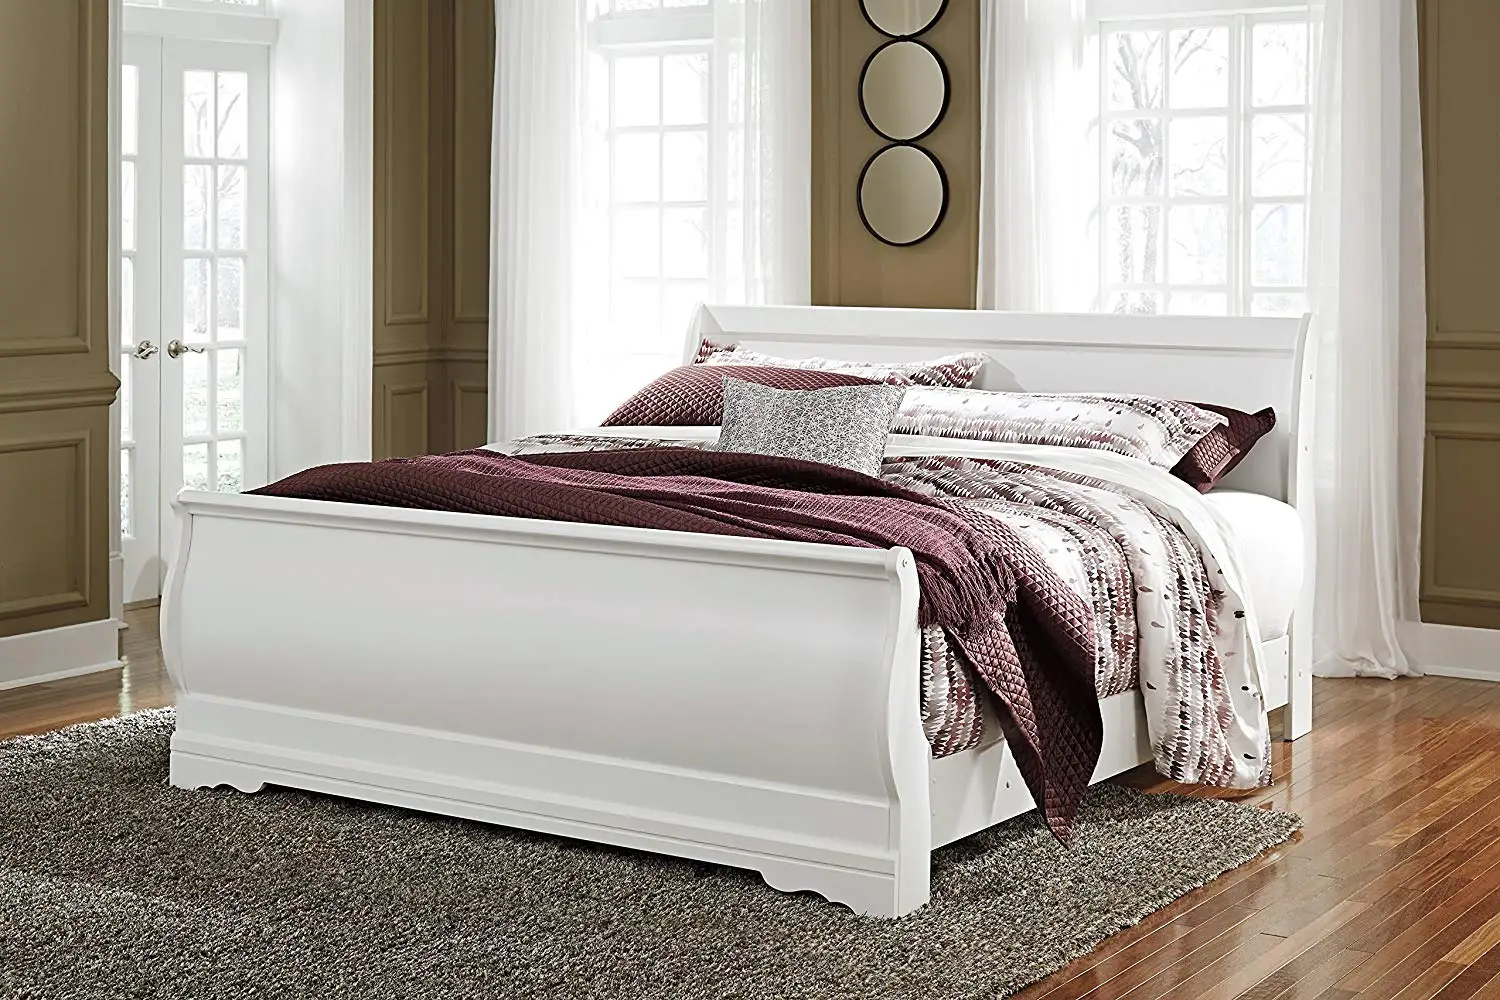 Cheap White King Size Sleigh Bed, find White King Size Sleigh Bed deals